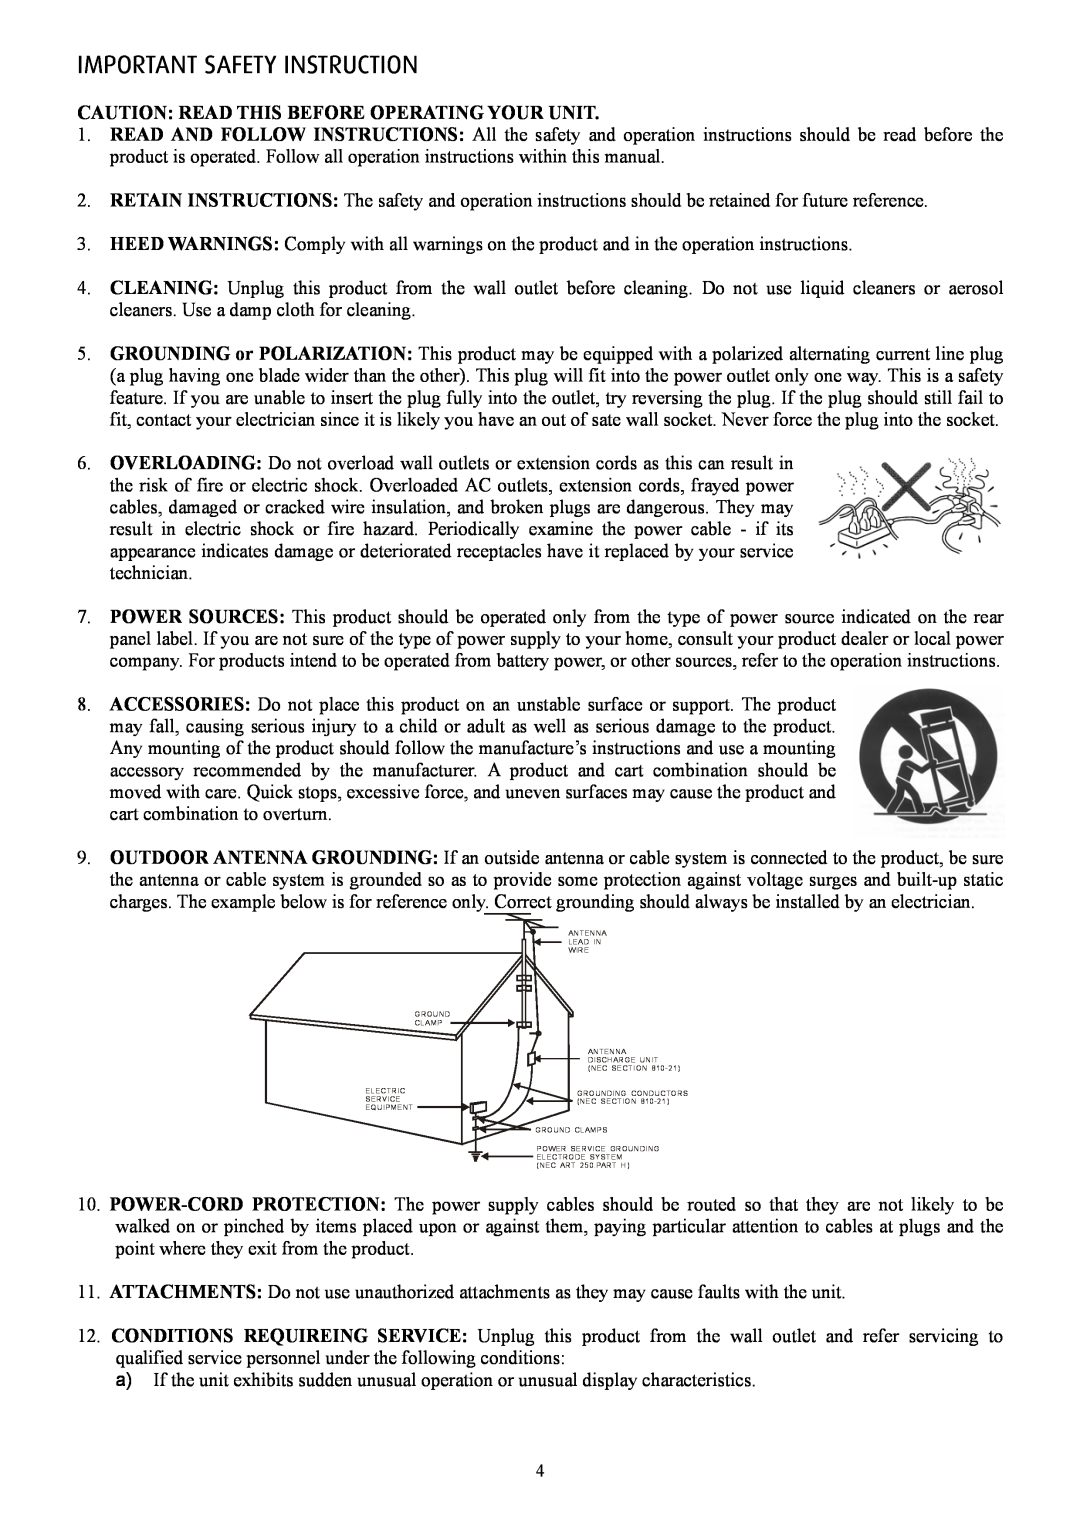 Eltax AVR-900 instruction manual Important Safety Instruction, Caution Read This Before Operating Your Unit 